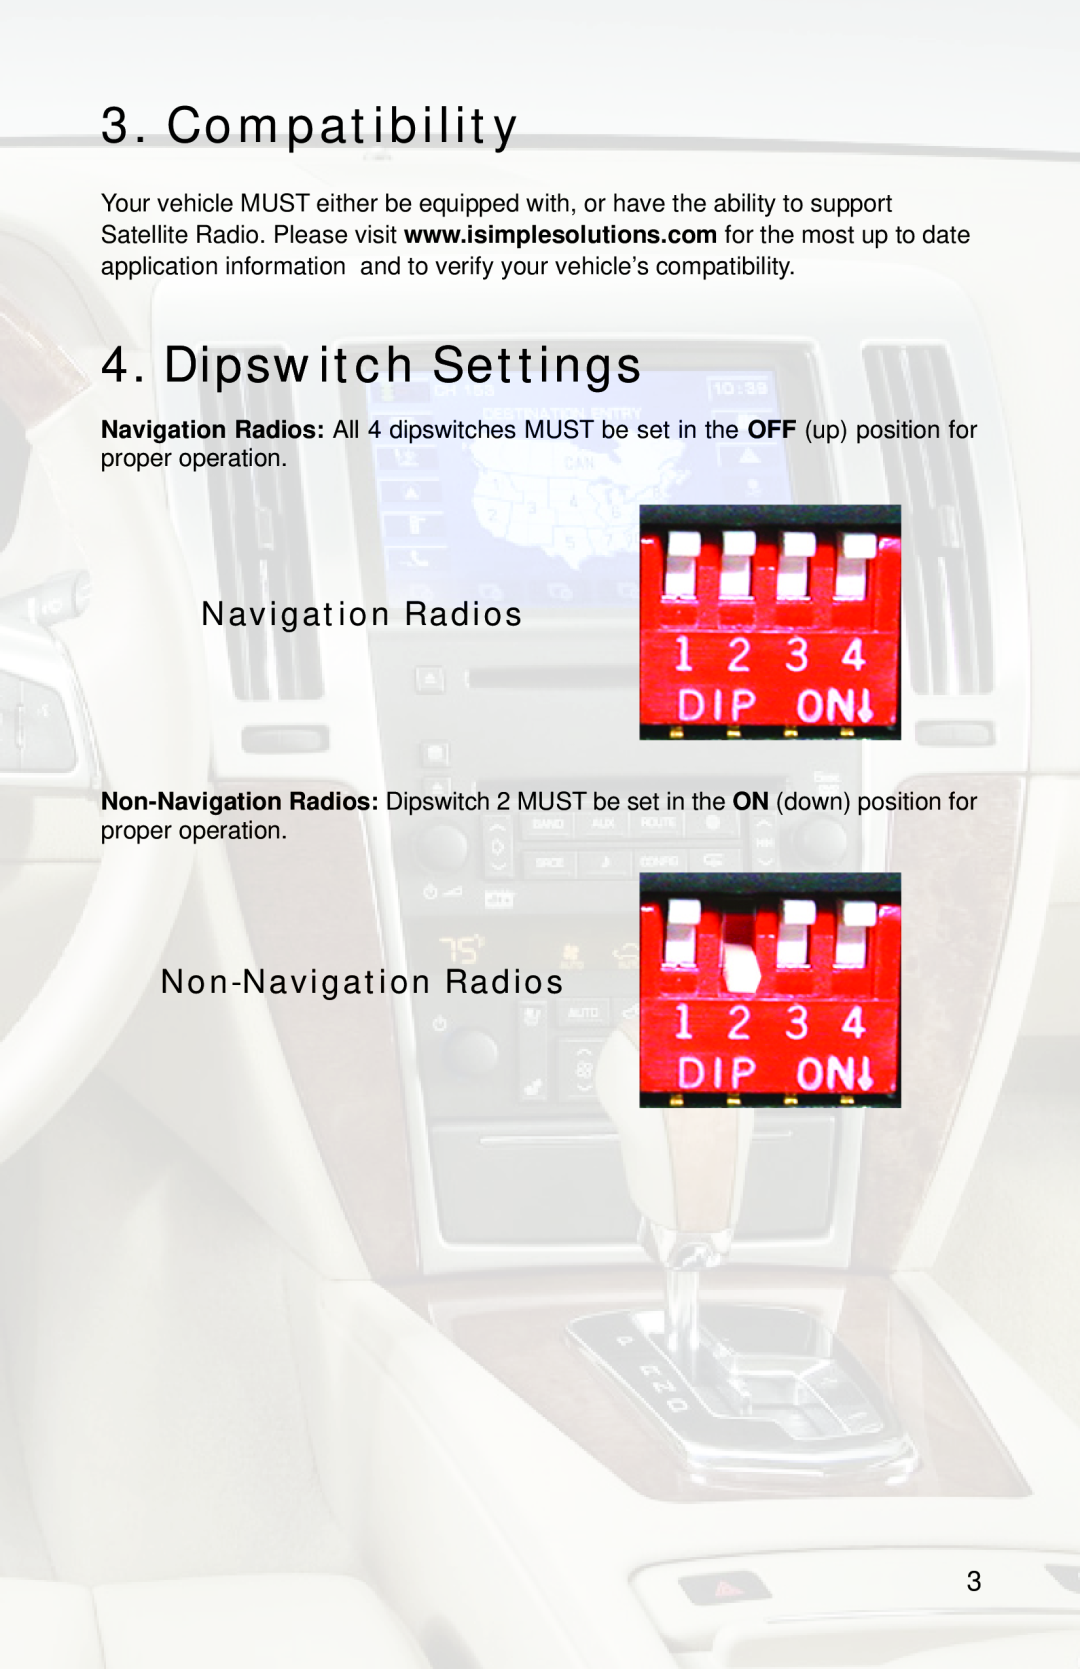 iSimple PGHGM4 owner manual Compatibility, Dipswitch Settings, Navigation Radios, Non-NavigationRadios 